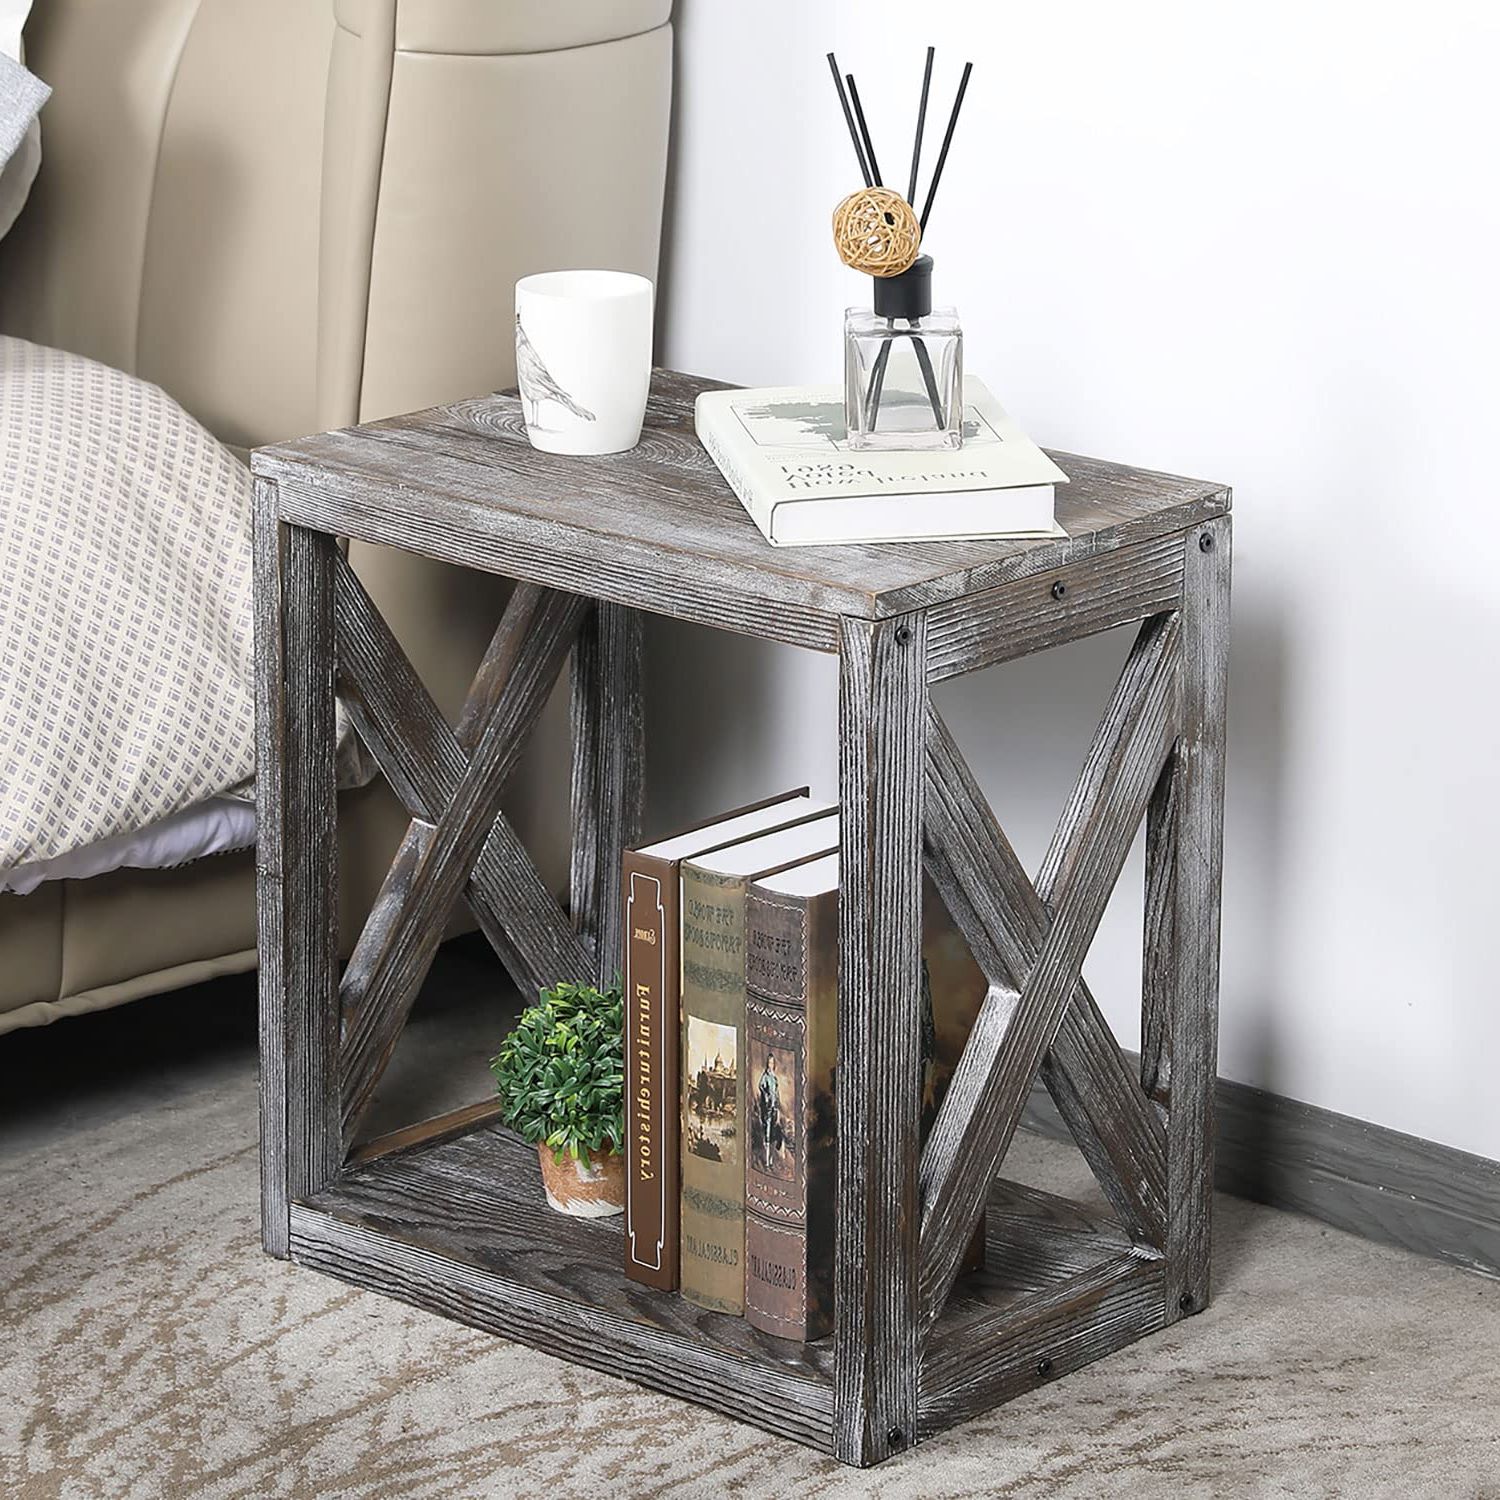 Latest Amazon: Mygift Vintage Gray Solid Wood Small End Table/side Table/night  Stand/bedside Table With X Design And Bottom Storage Shelf, Decorative  Sturdy Nightstand : Home & Kitchen Regarding Rustic Gray End Tables (Photo 7 of 10)